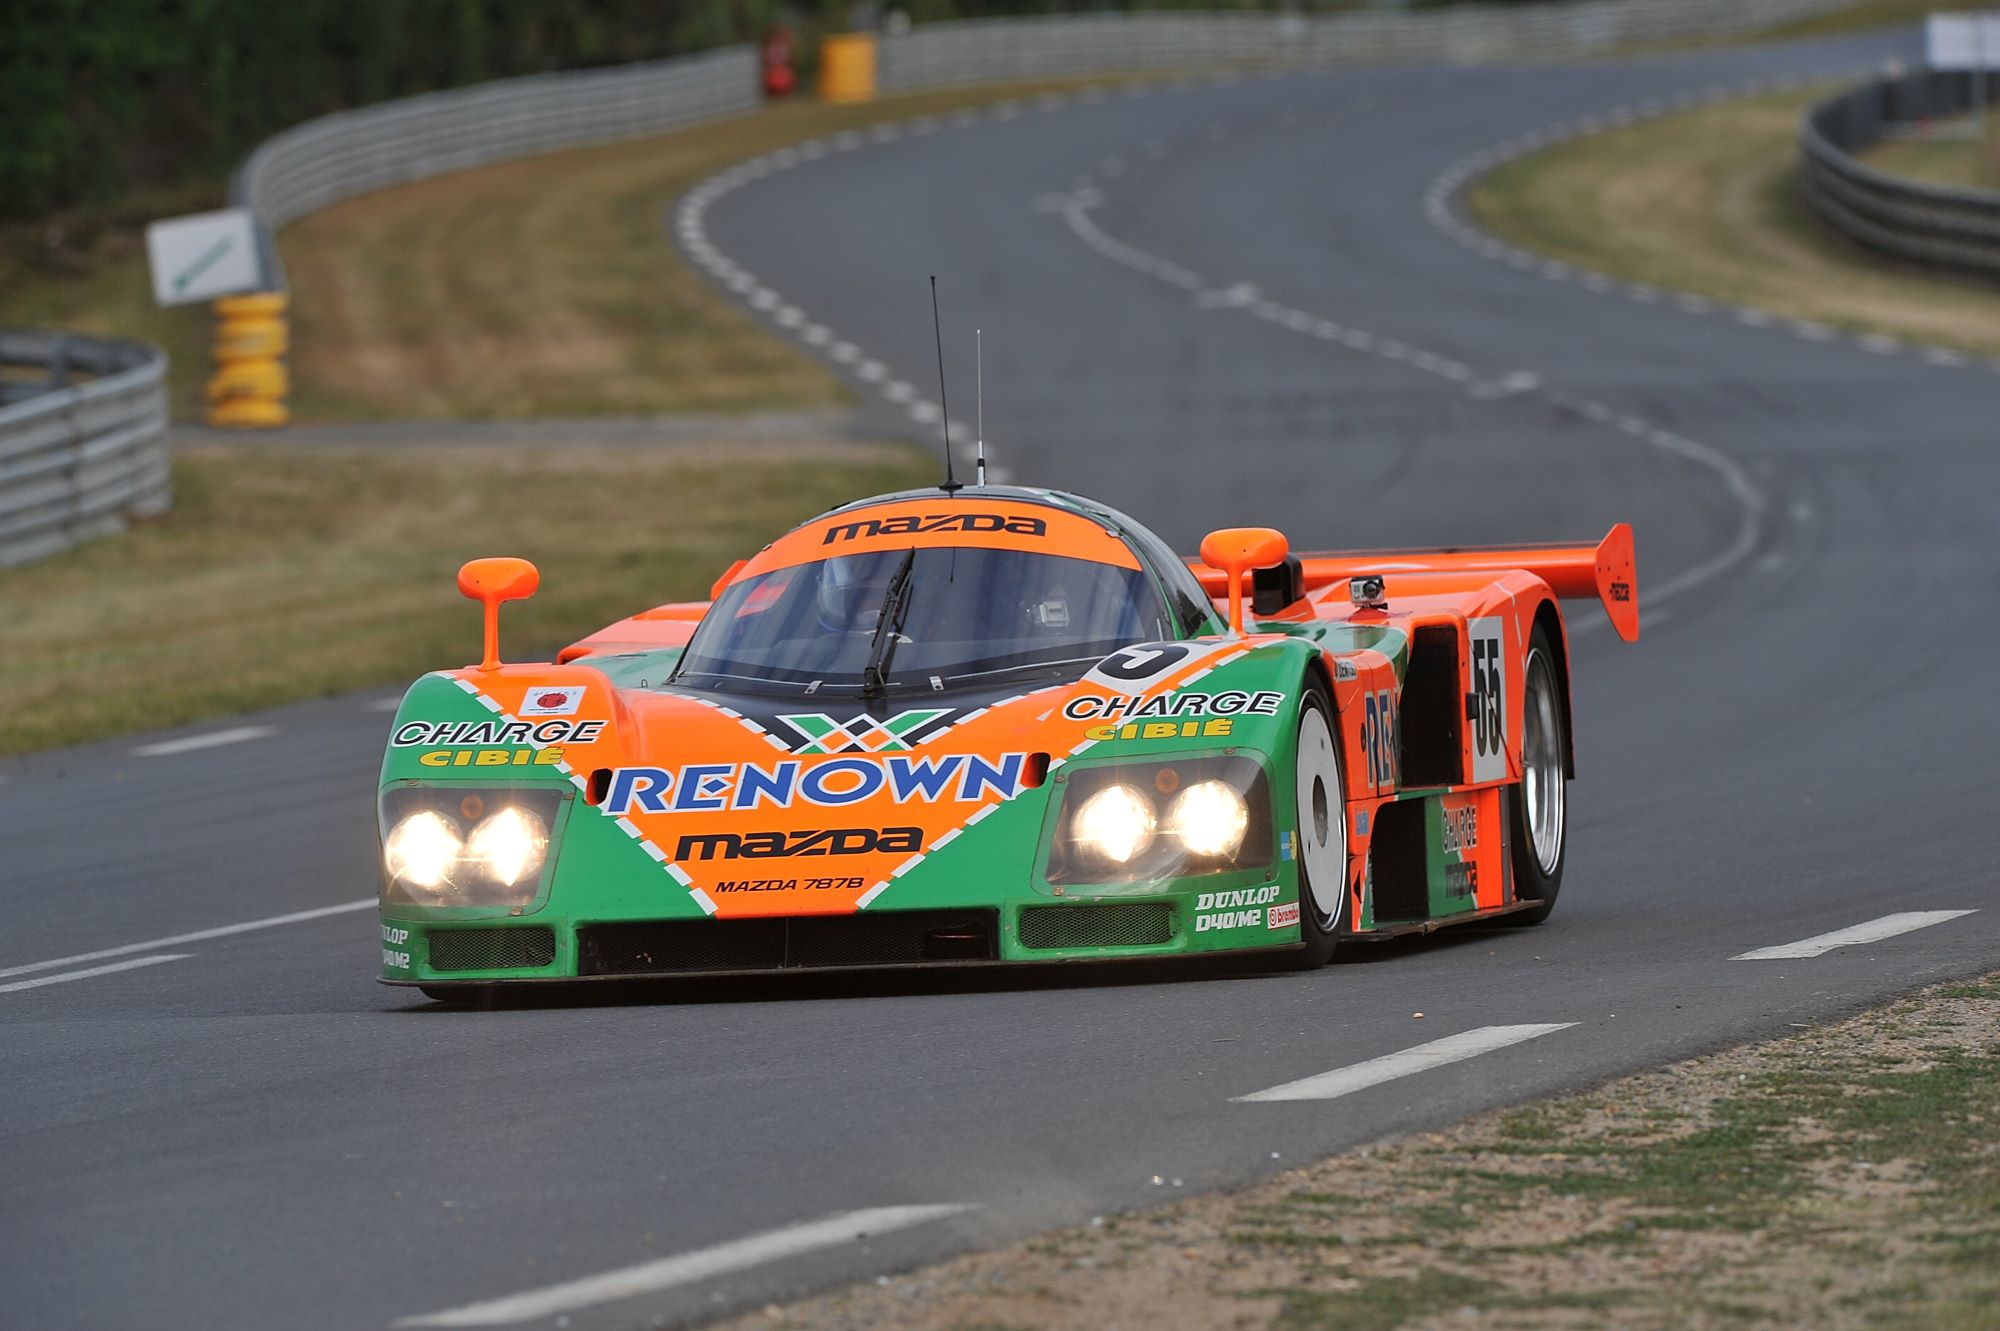 A 1991 Mazda 787B on a track now found in the Mazda museum